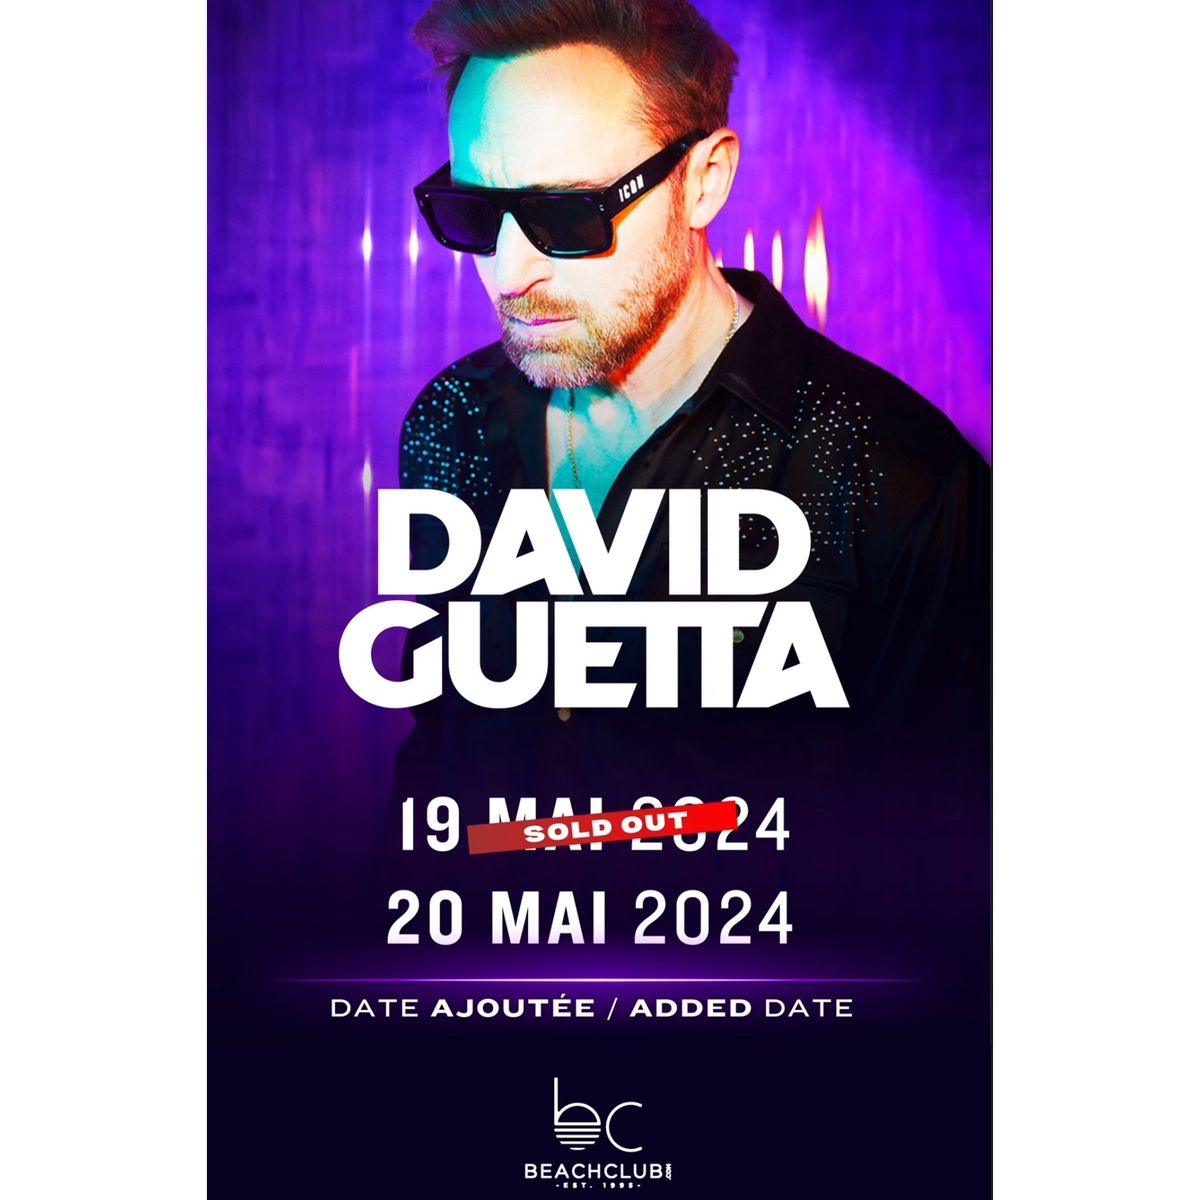 PARTY BUS TO | DAY 2 DAVID GUETTA MAY 20\/24